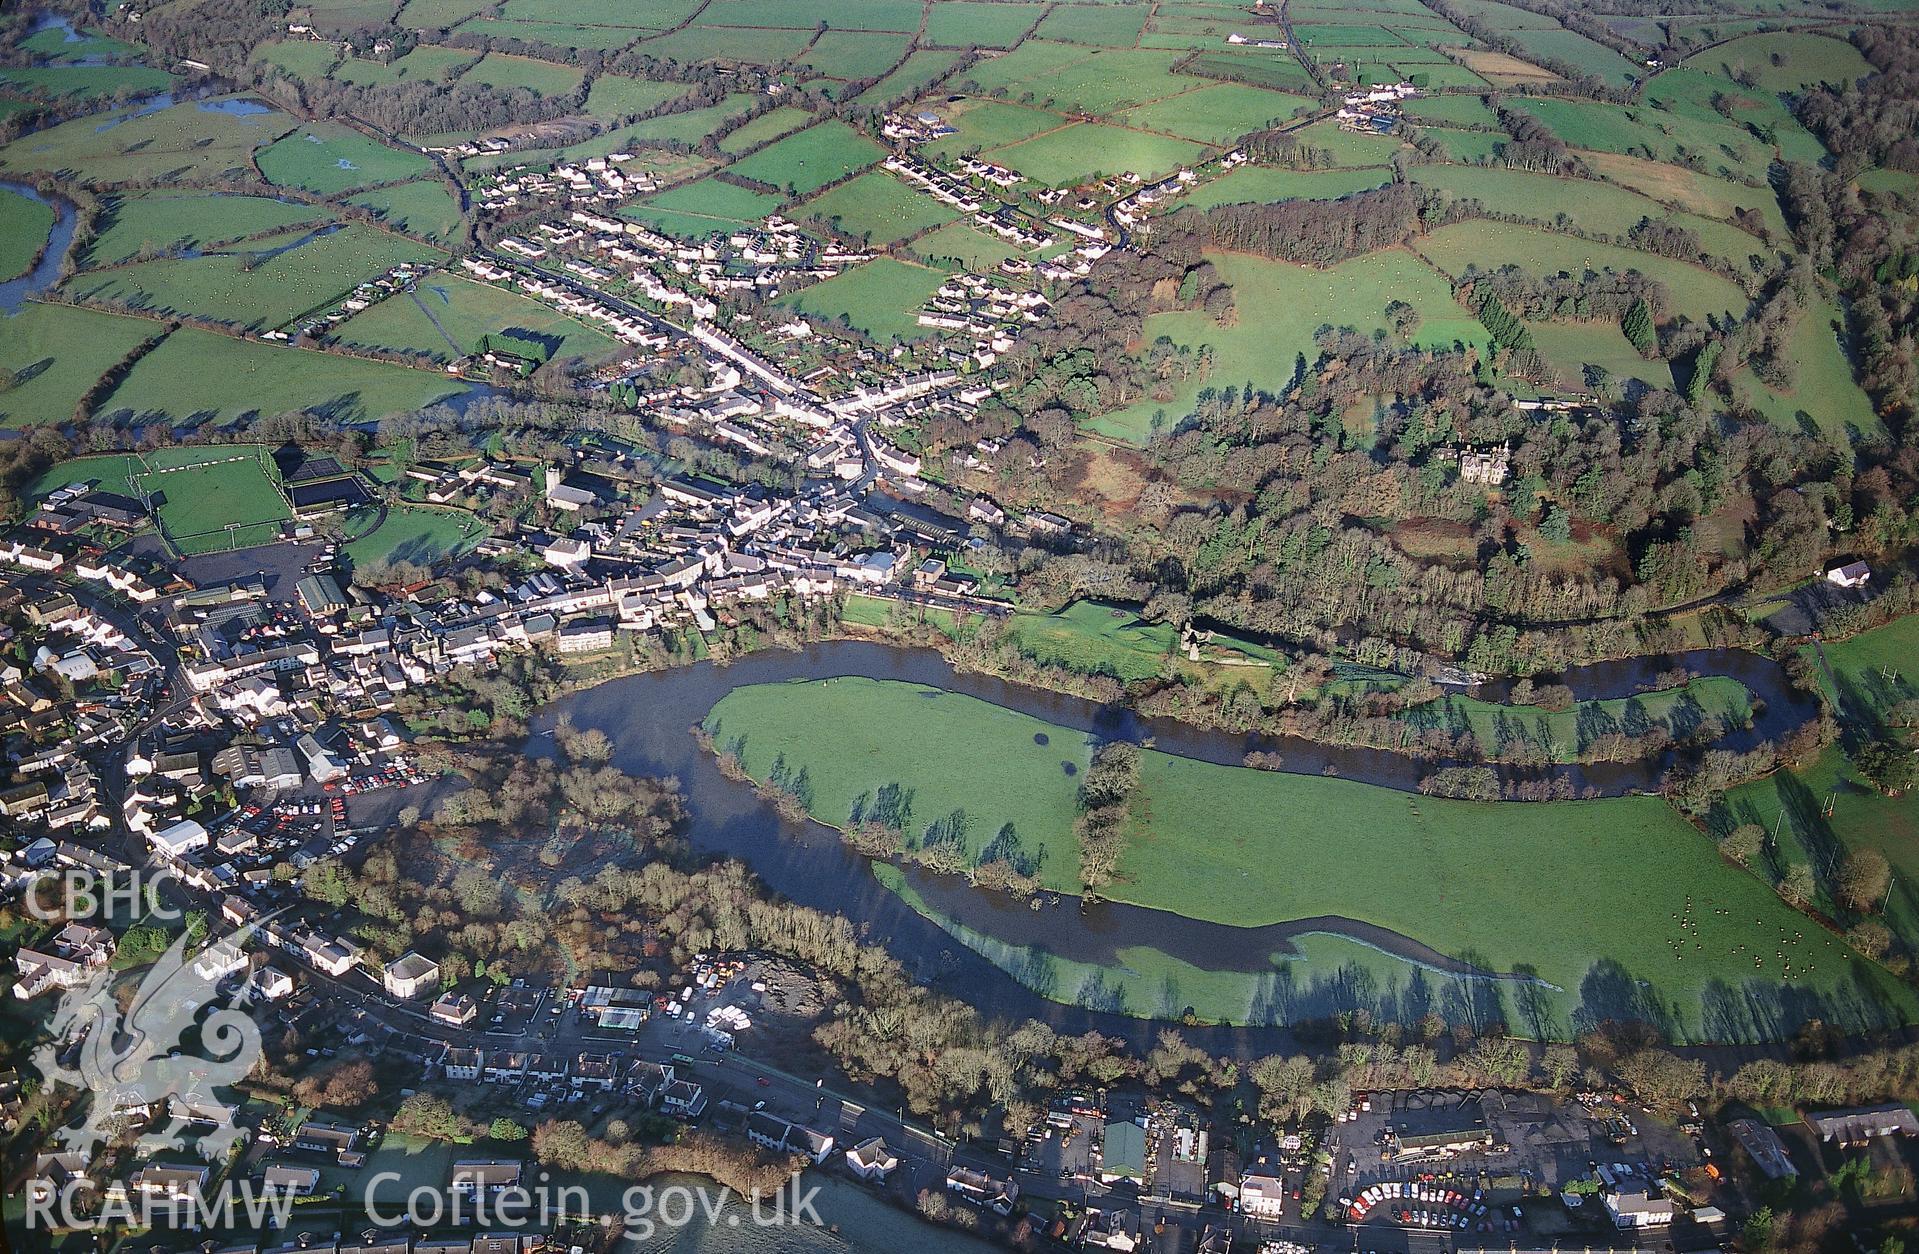 RCAHMW colour slide oblique aerial photograph of Newcastle Emlyn, taken on 19/12/1999 by Toby Driver